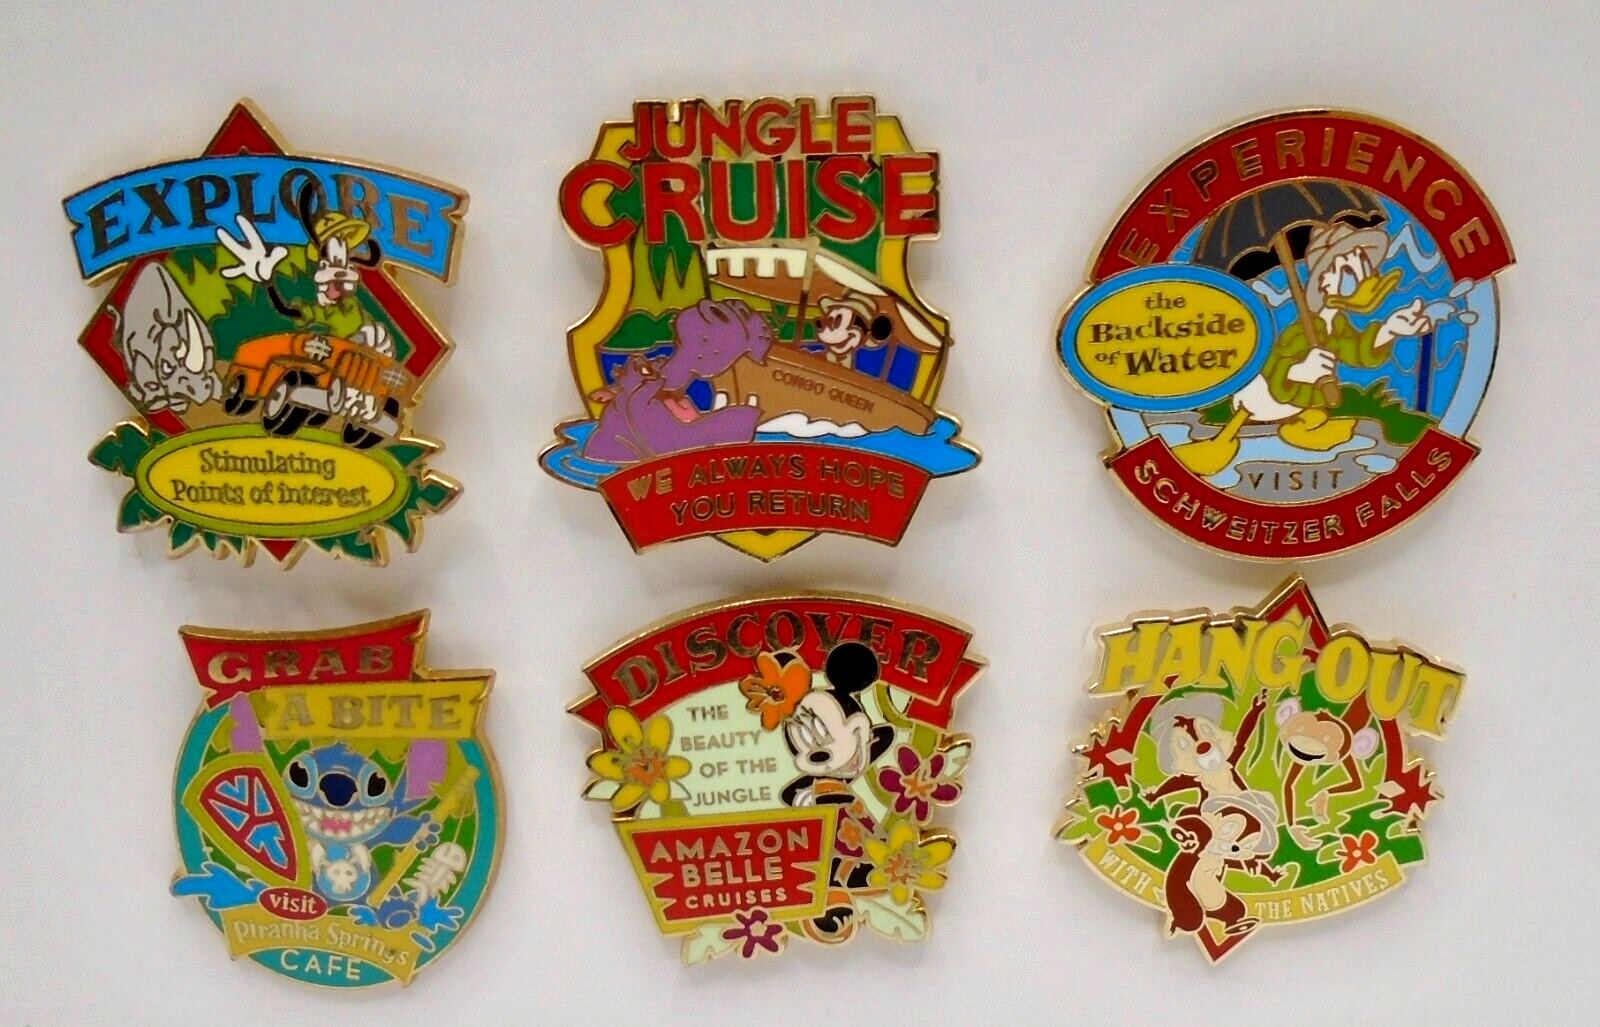 Disney DLR The Jungle Cruise Collection 2008 Pin Set 6 GWP  Pins + Map